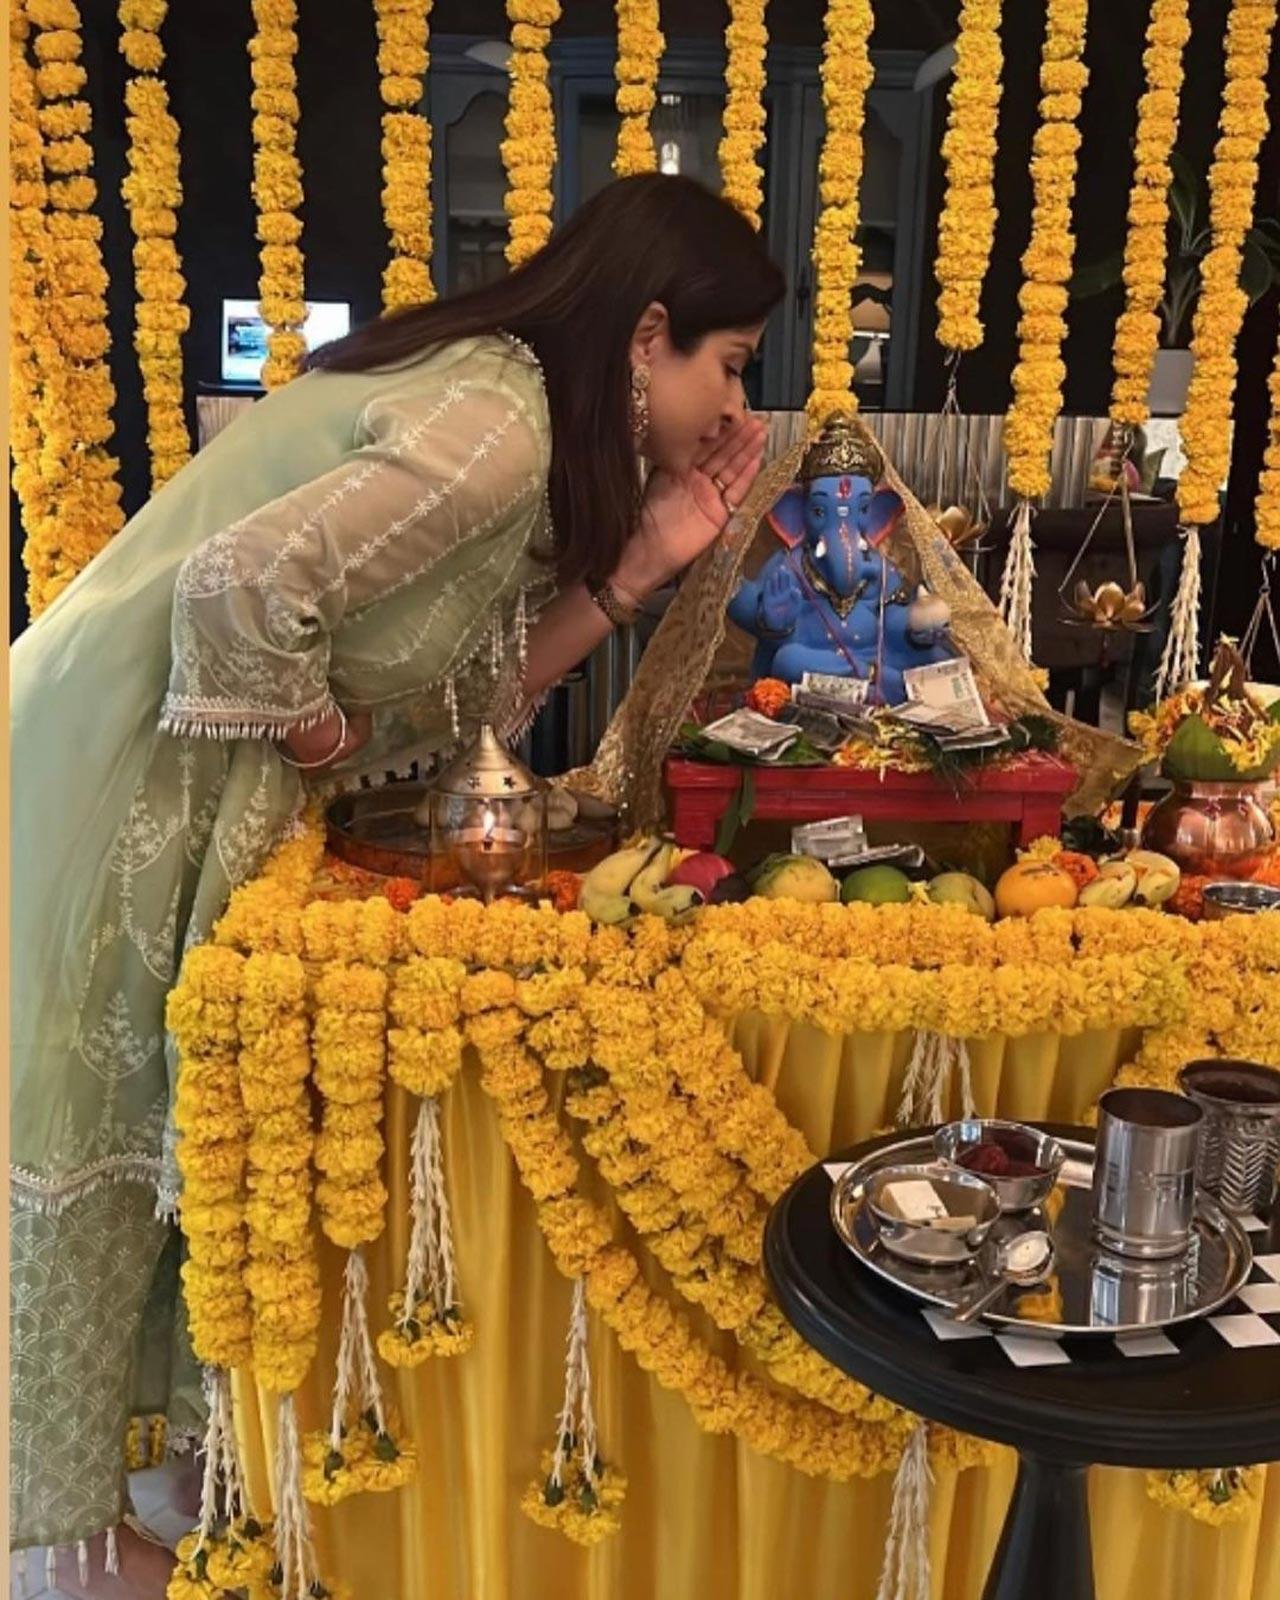 Maheep Kapoor welcomed Lord Ganesha on Vinayak Chaturthi, on August 31, 2022. For the celebration, the actress was seen wearing a pretty pastel coloured ethnic wear